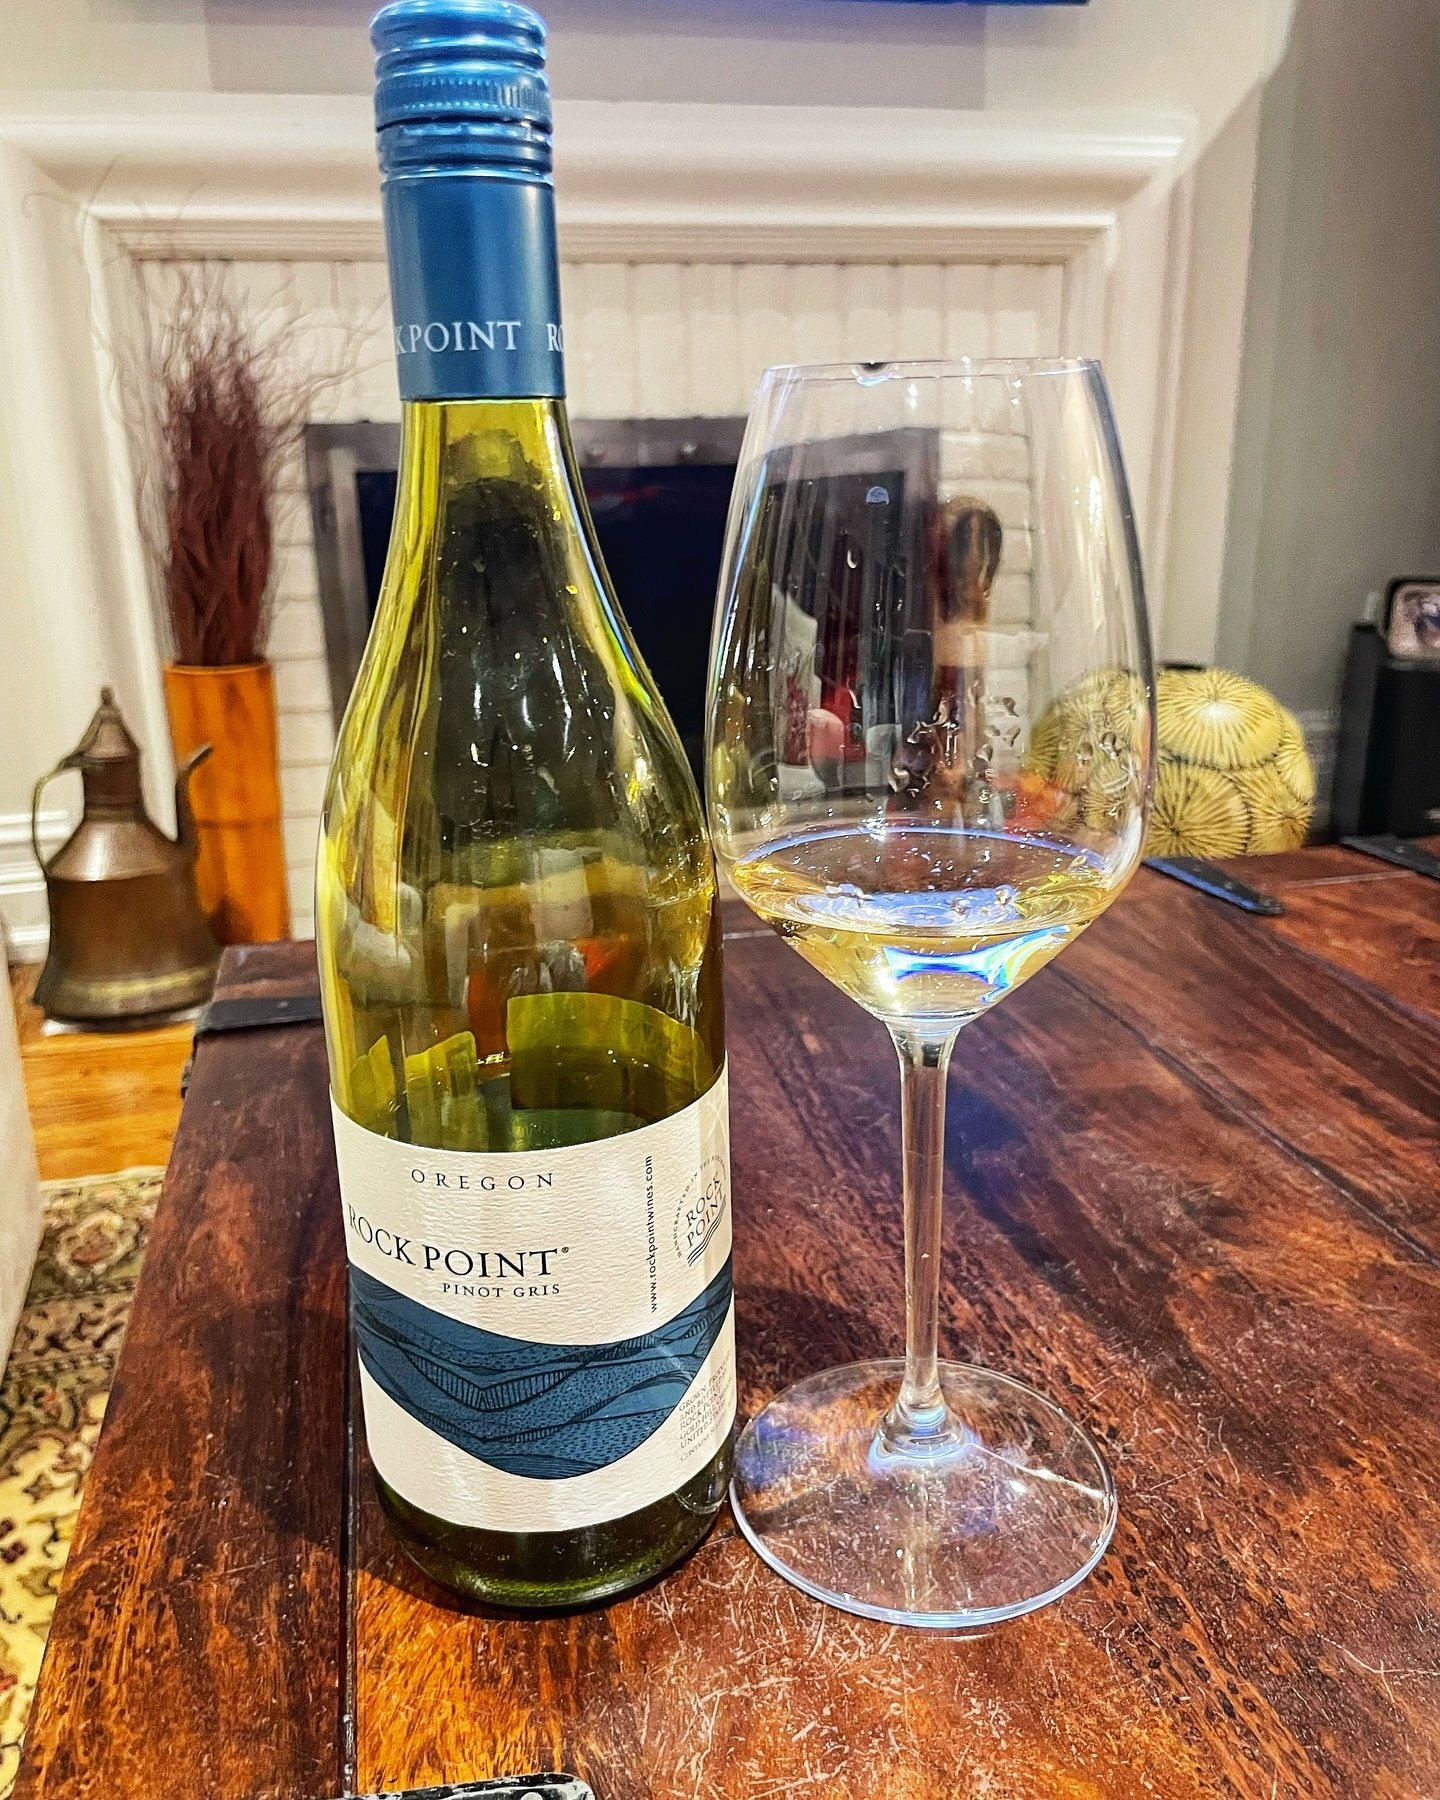 It&rsquo;s truly sunshine in a glass! ☀️😃
.
These are the exact words that chorused through my mind repeatedly as I sipped this amazing Pinot Gris from Oregon. I sipped, paused, sipped again, paused again&hellip;.and then reconfirmed my initial impr